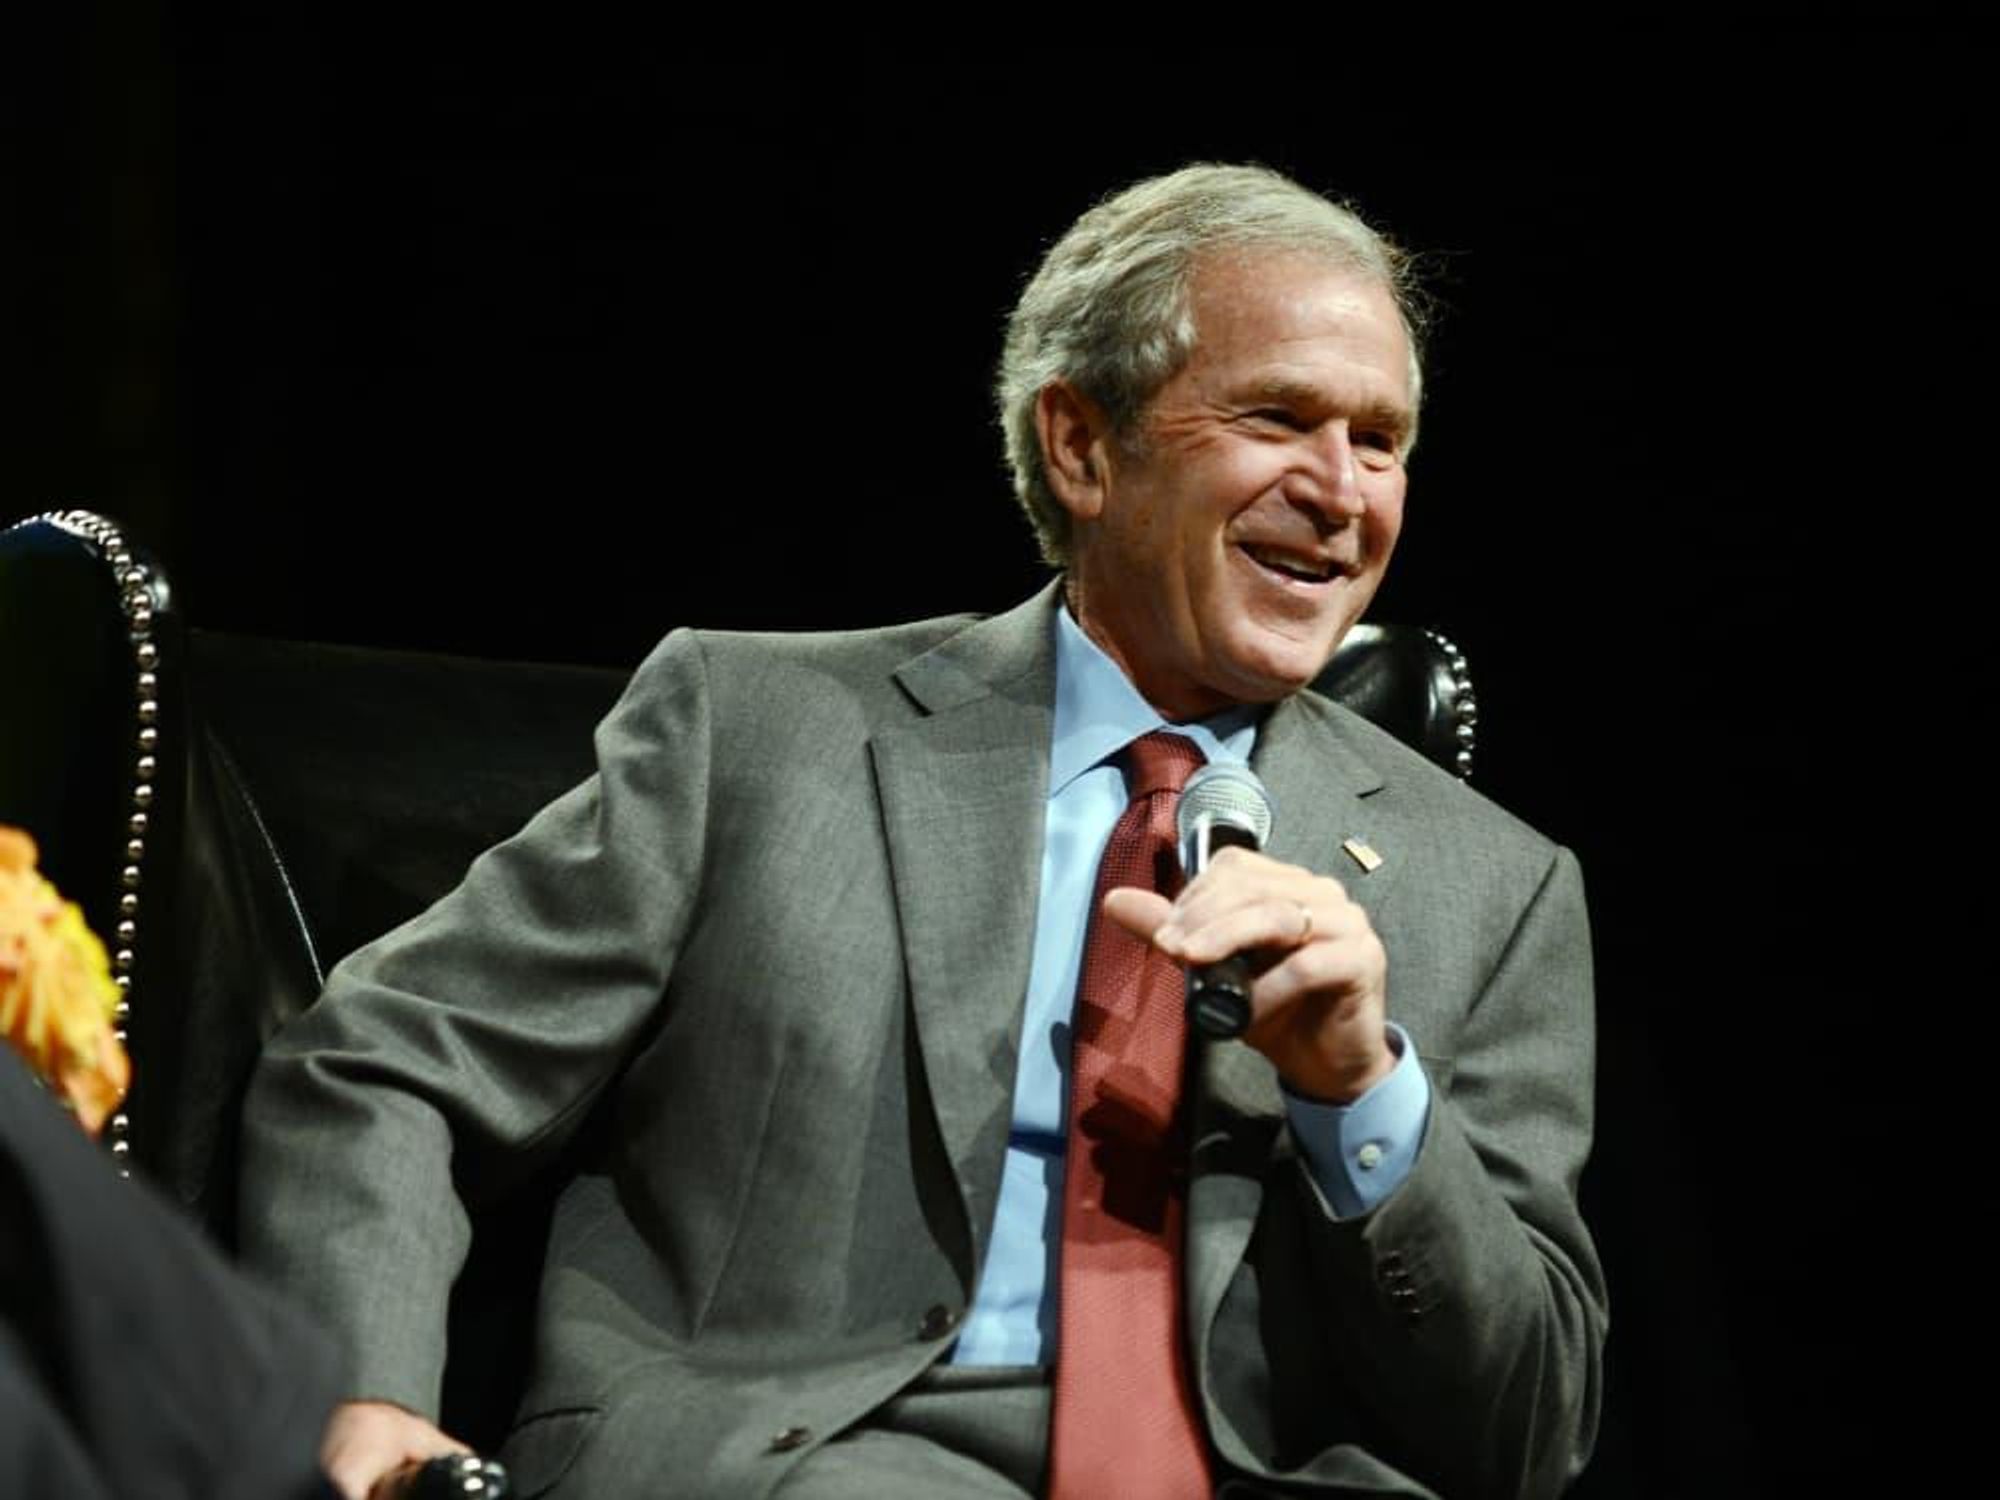 George W. Bush at Living Legend Luncheon